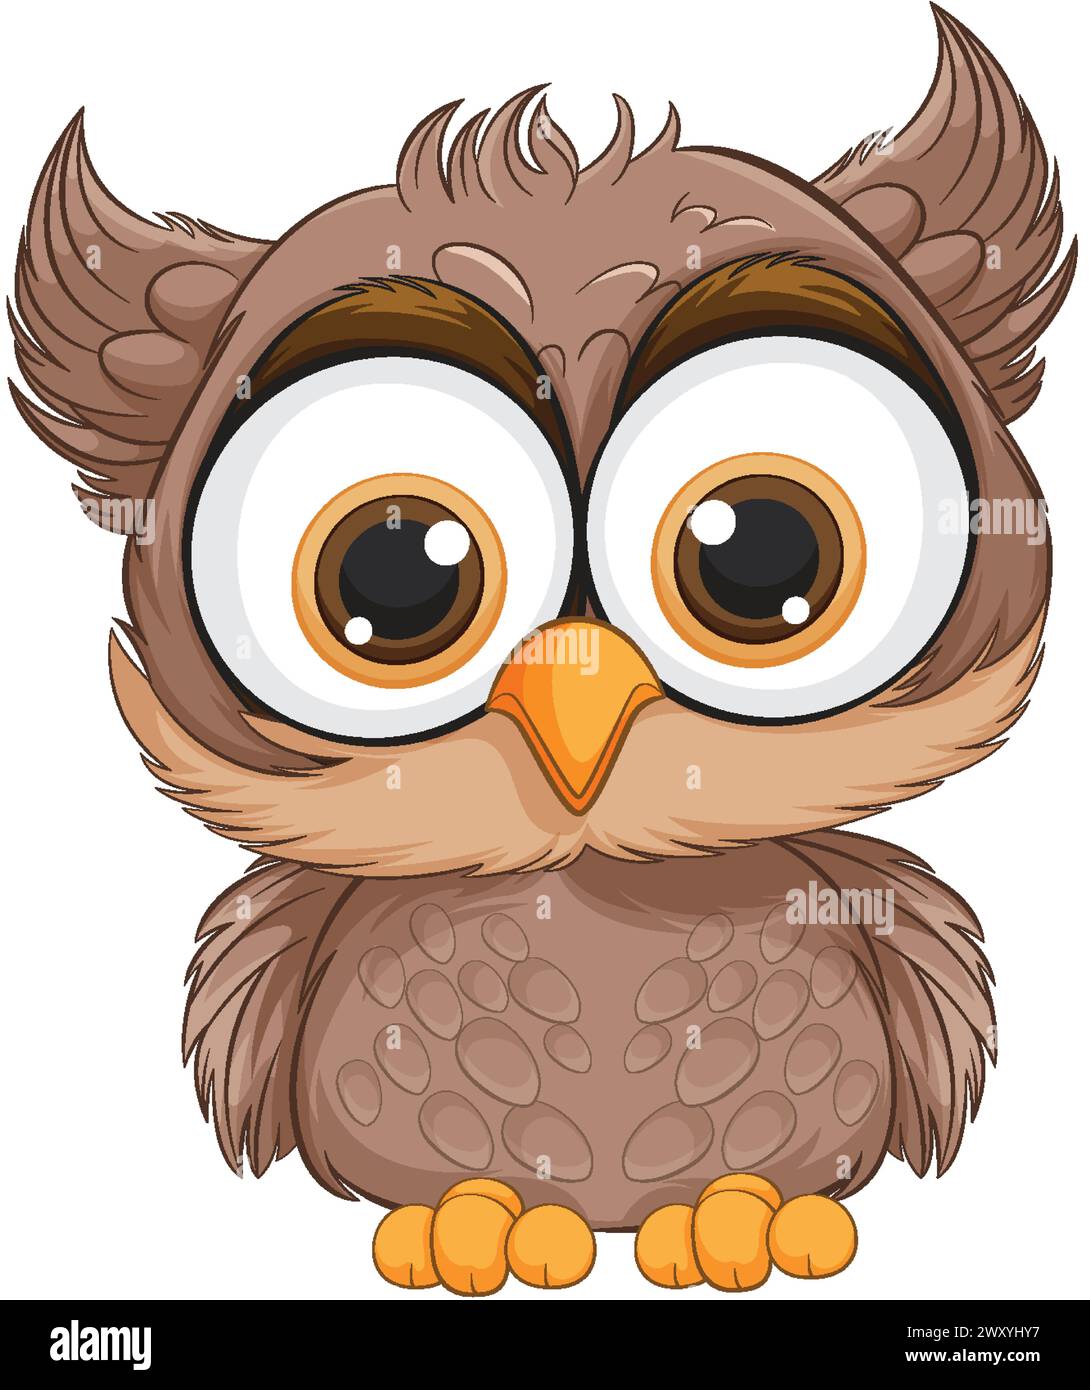 Adorable wide-eyed owl with fluffy feathers Stock Vector